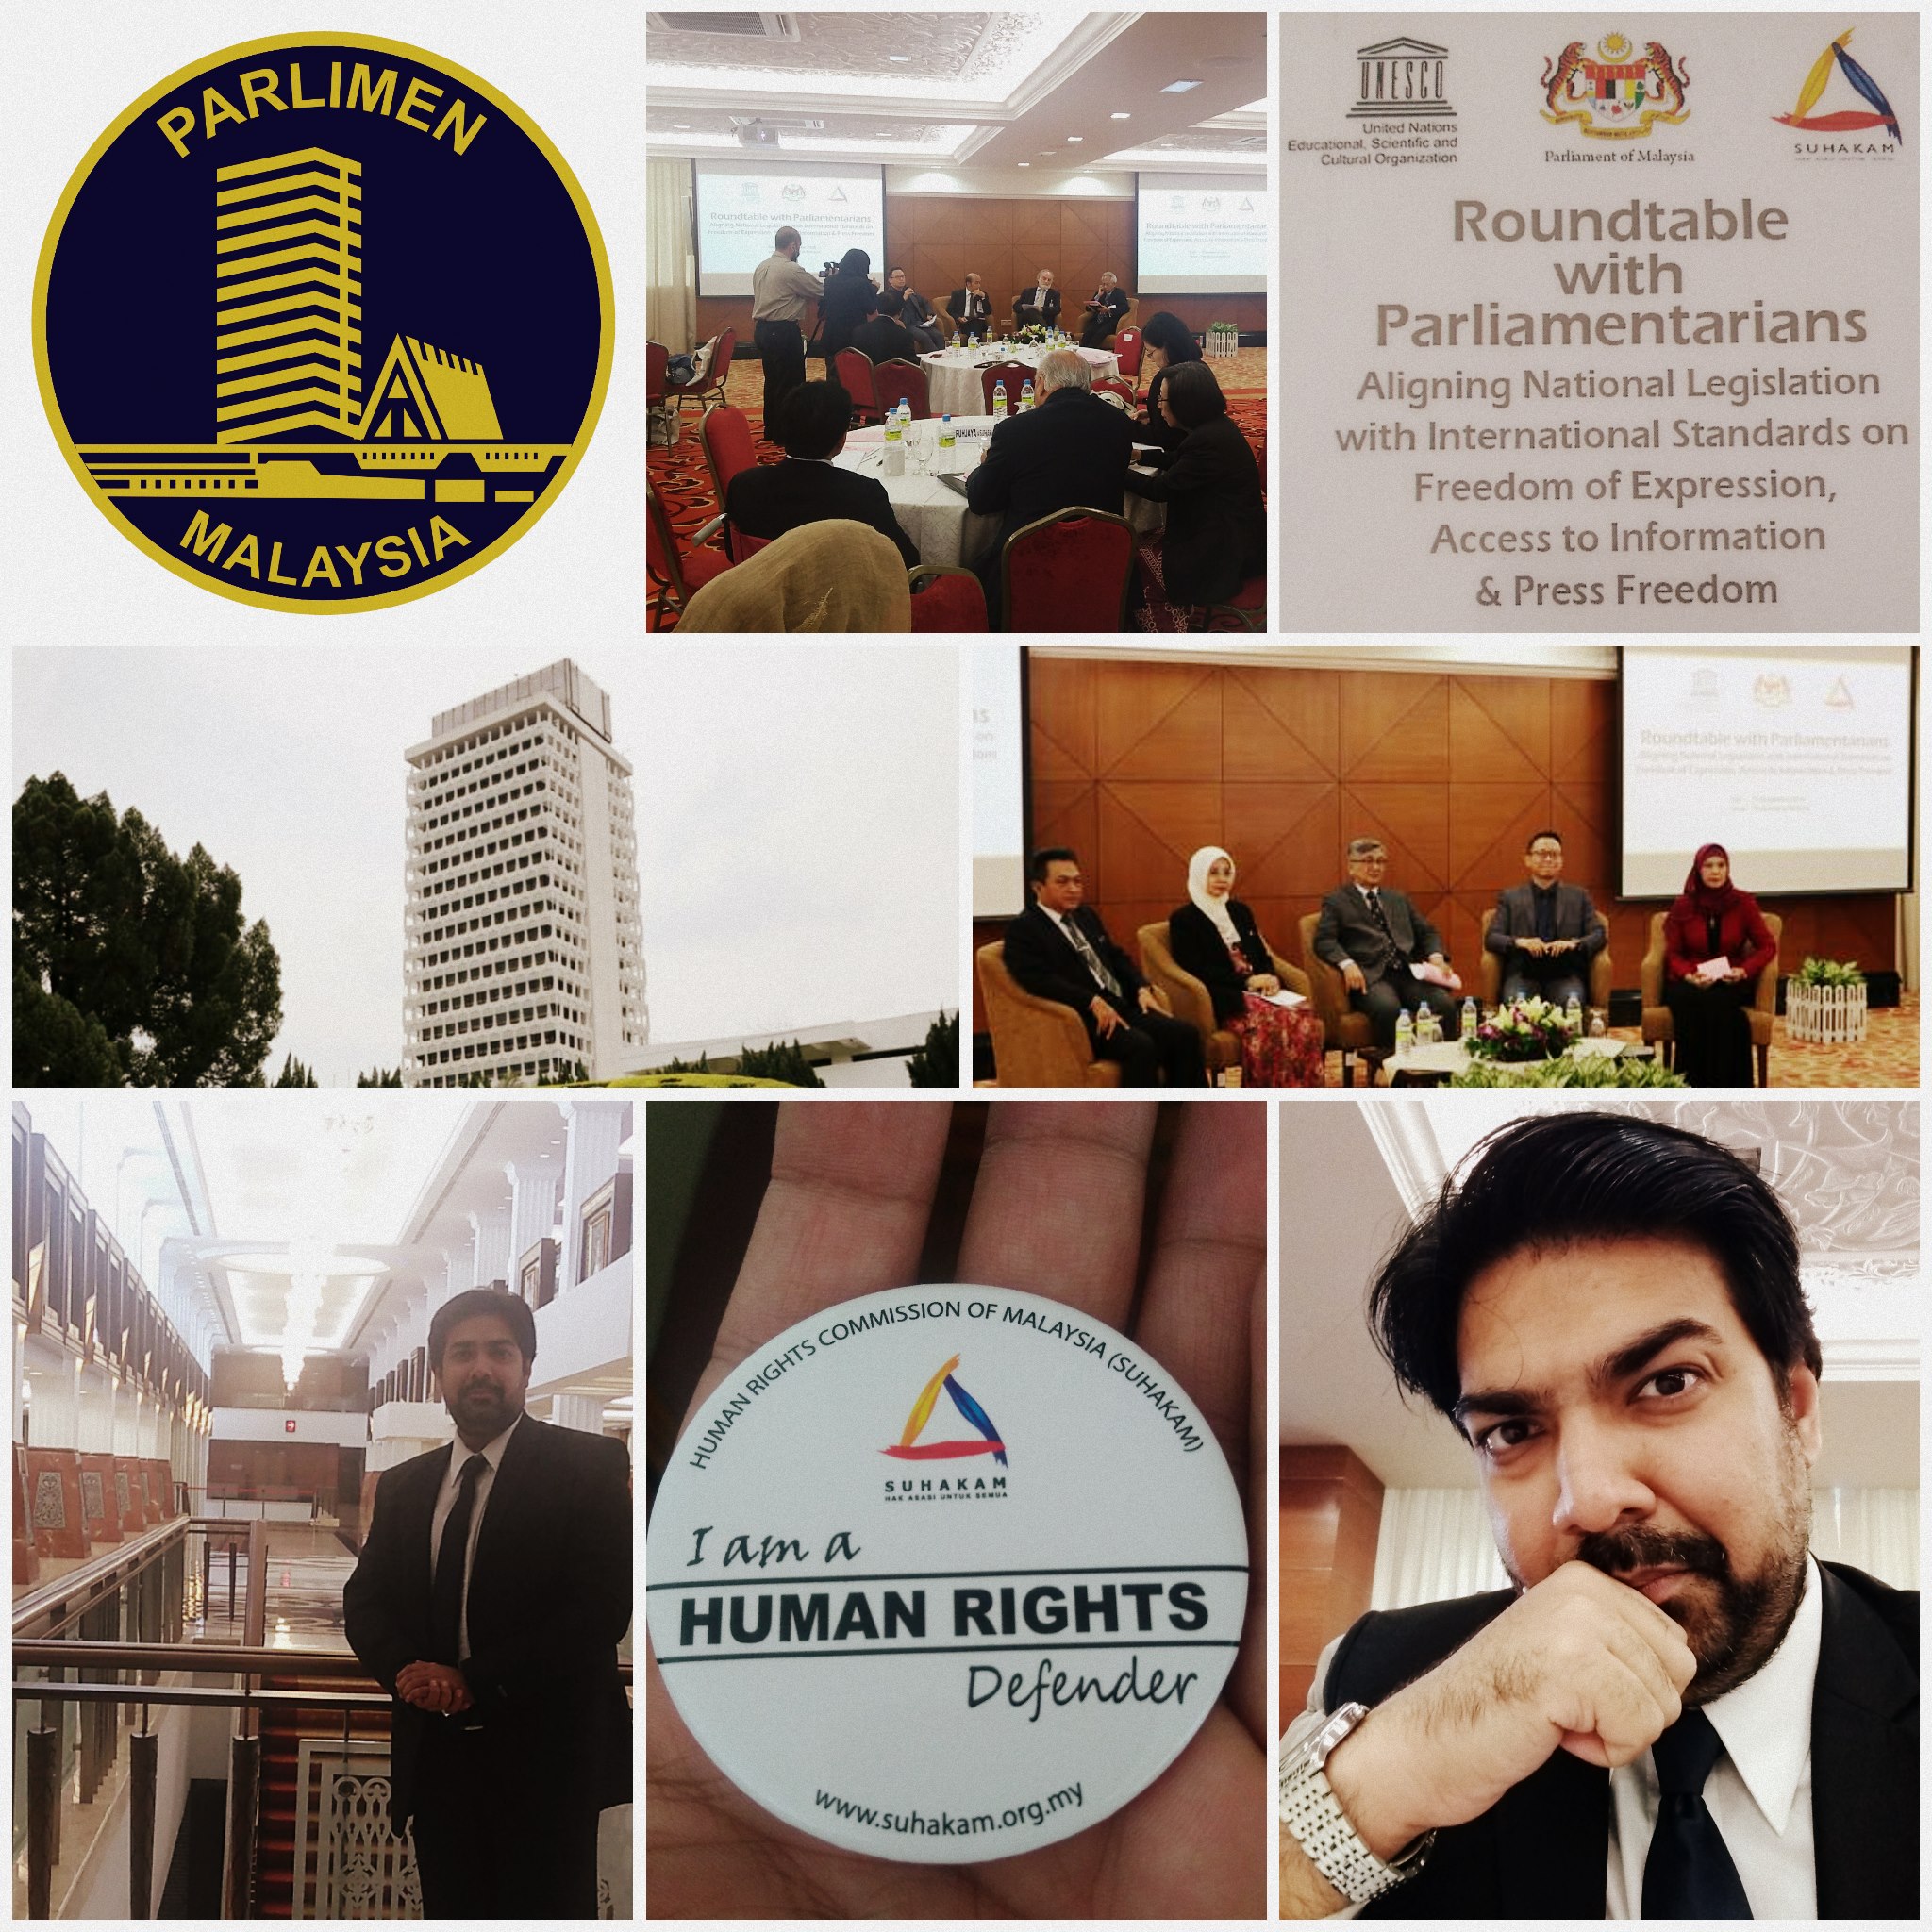 Access to Information Campaign at Malaysian Parliament